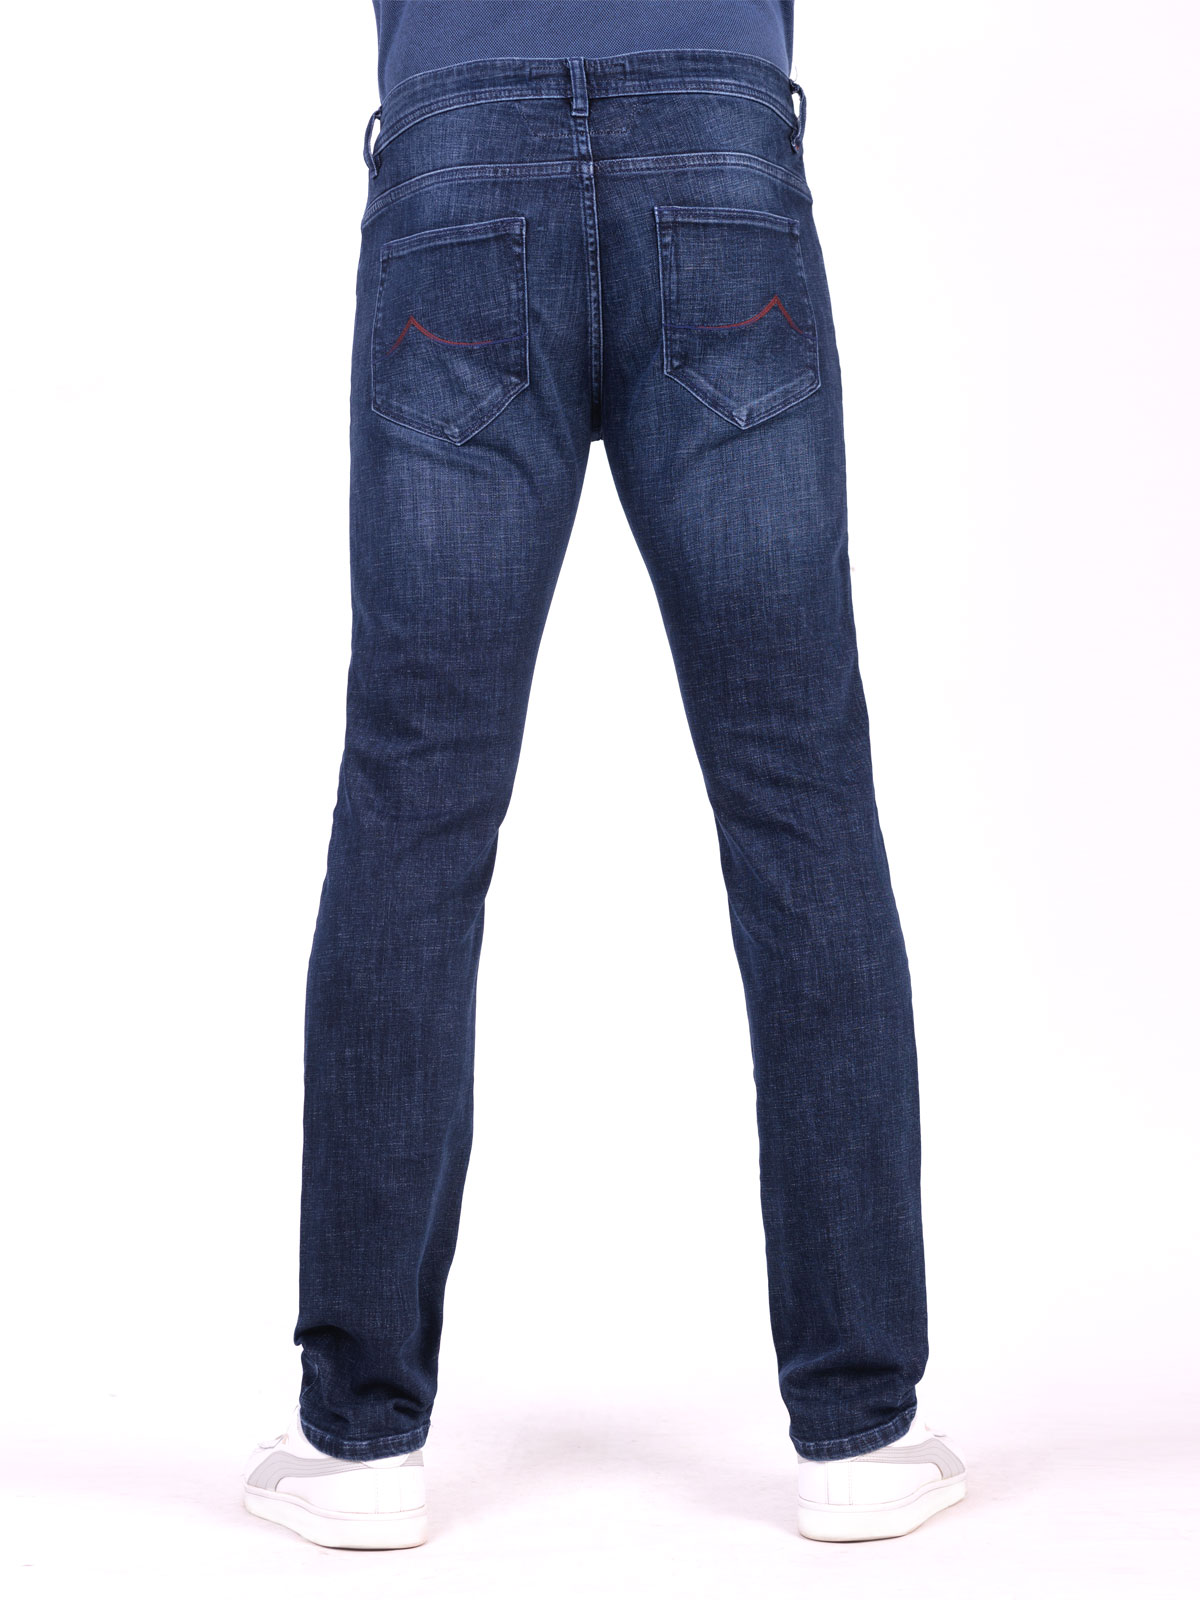 Blue jeans with a fitted silhouette - 62170 € 78.18 img2